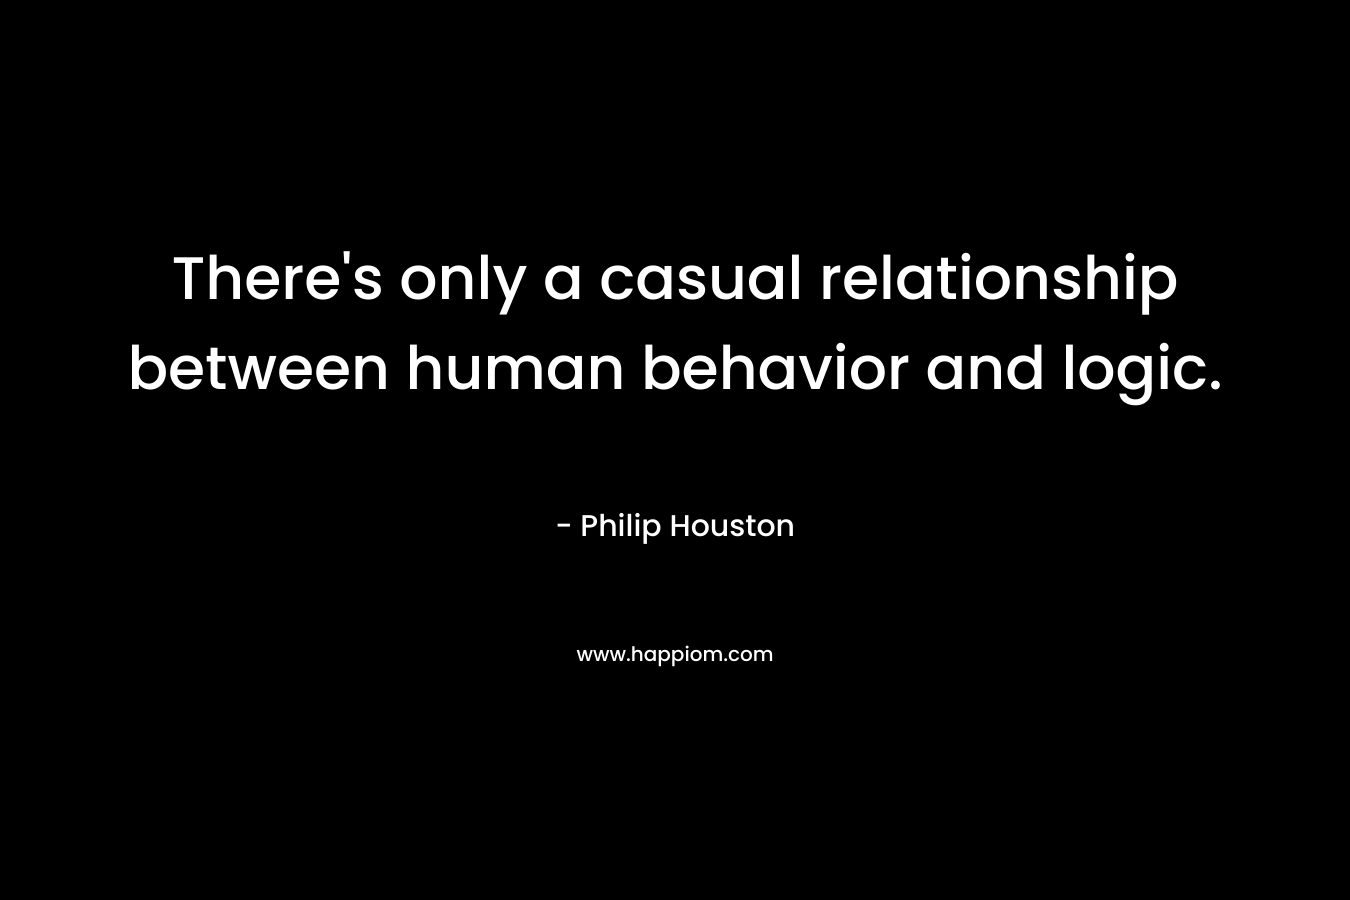 There’s only a casual relationship between human behavior and logic. – Philip Houston